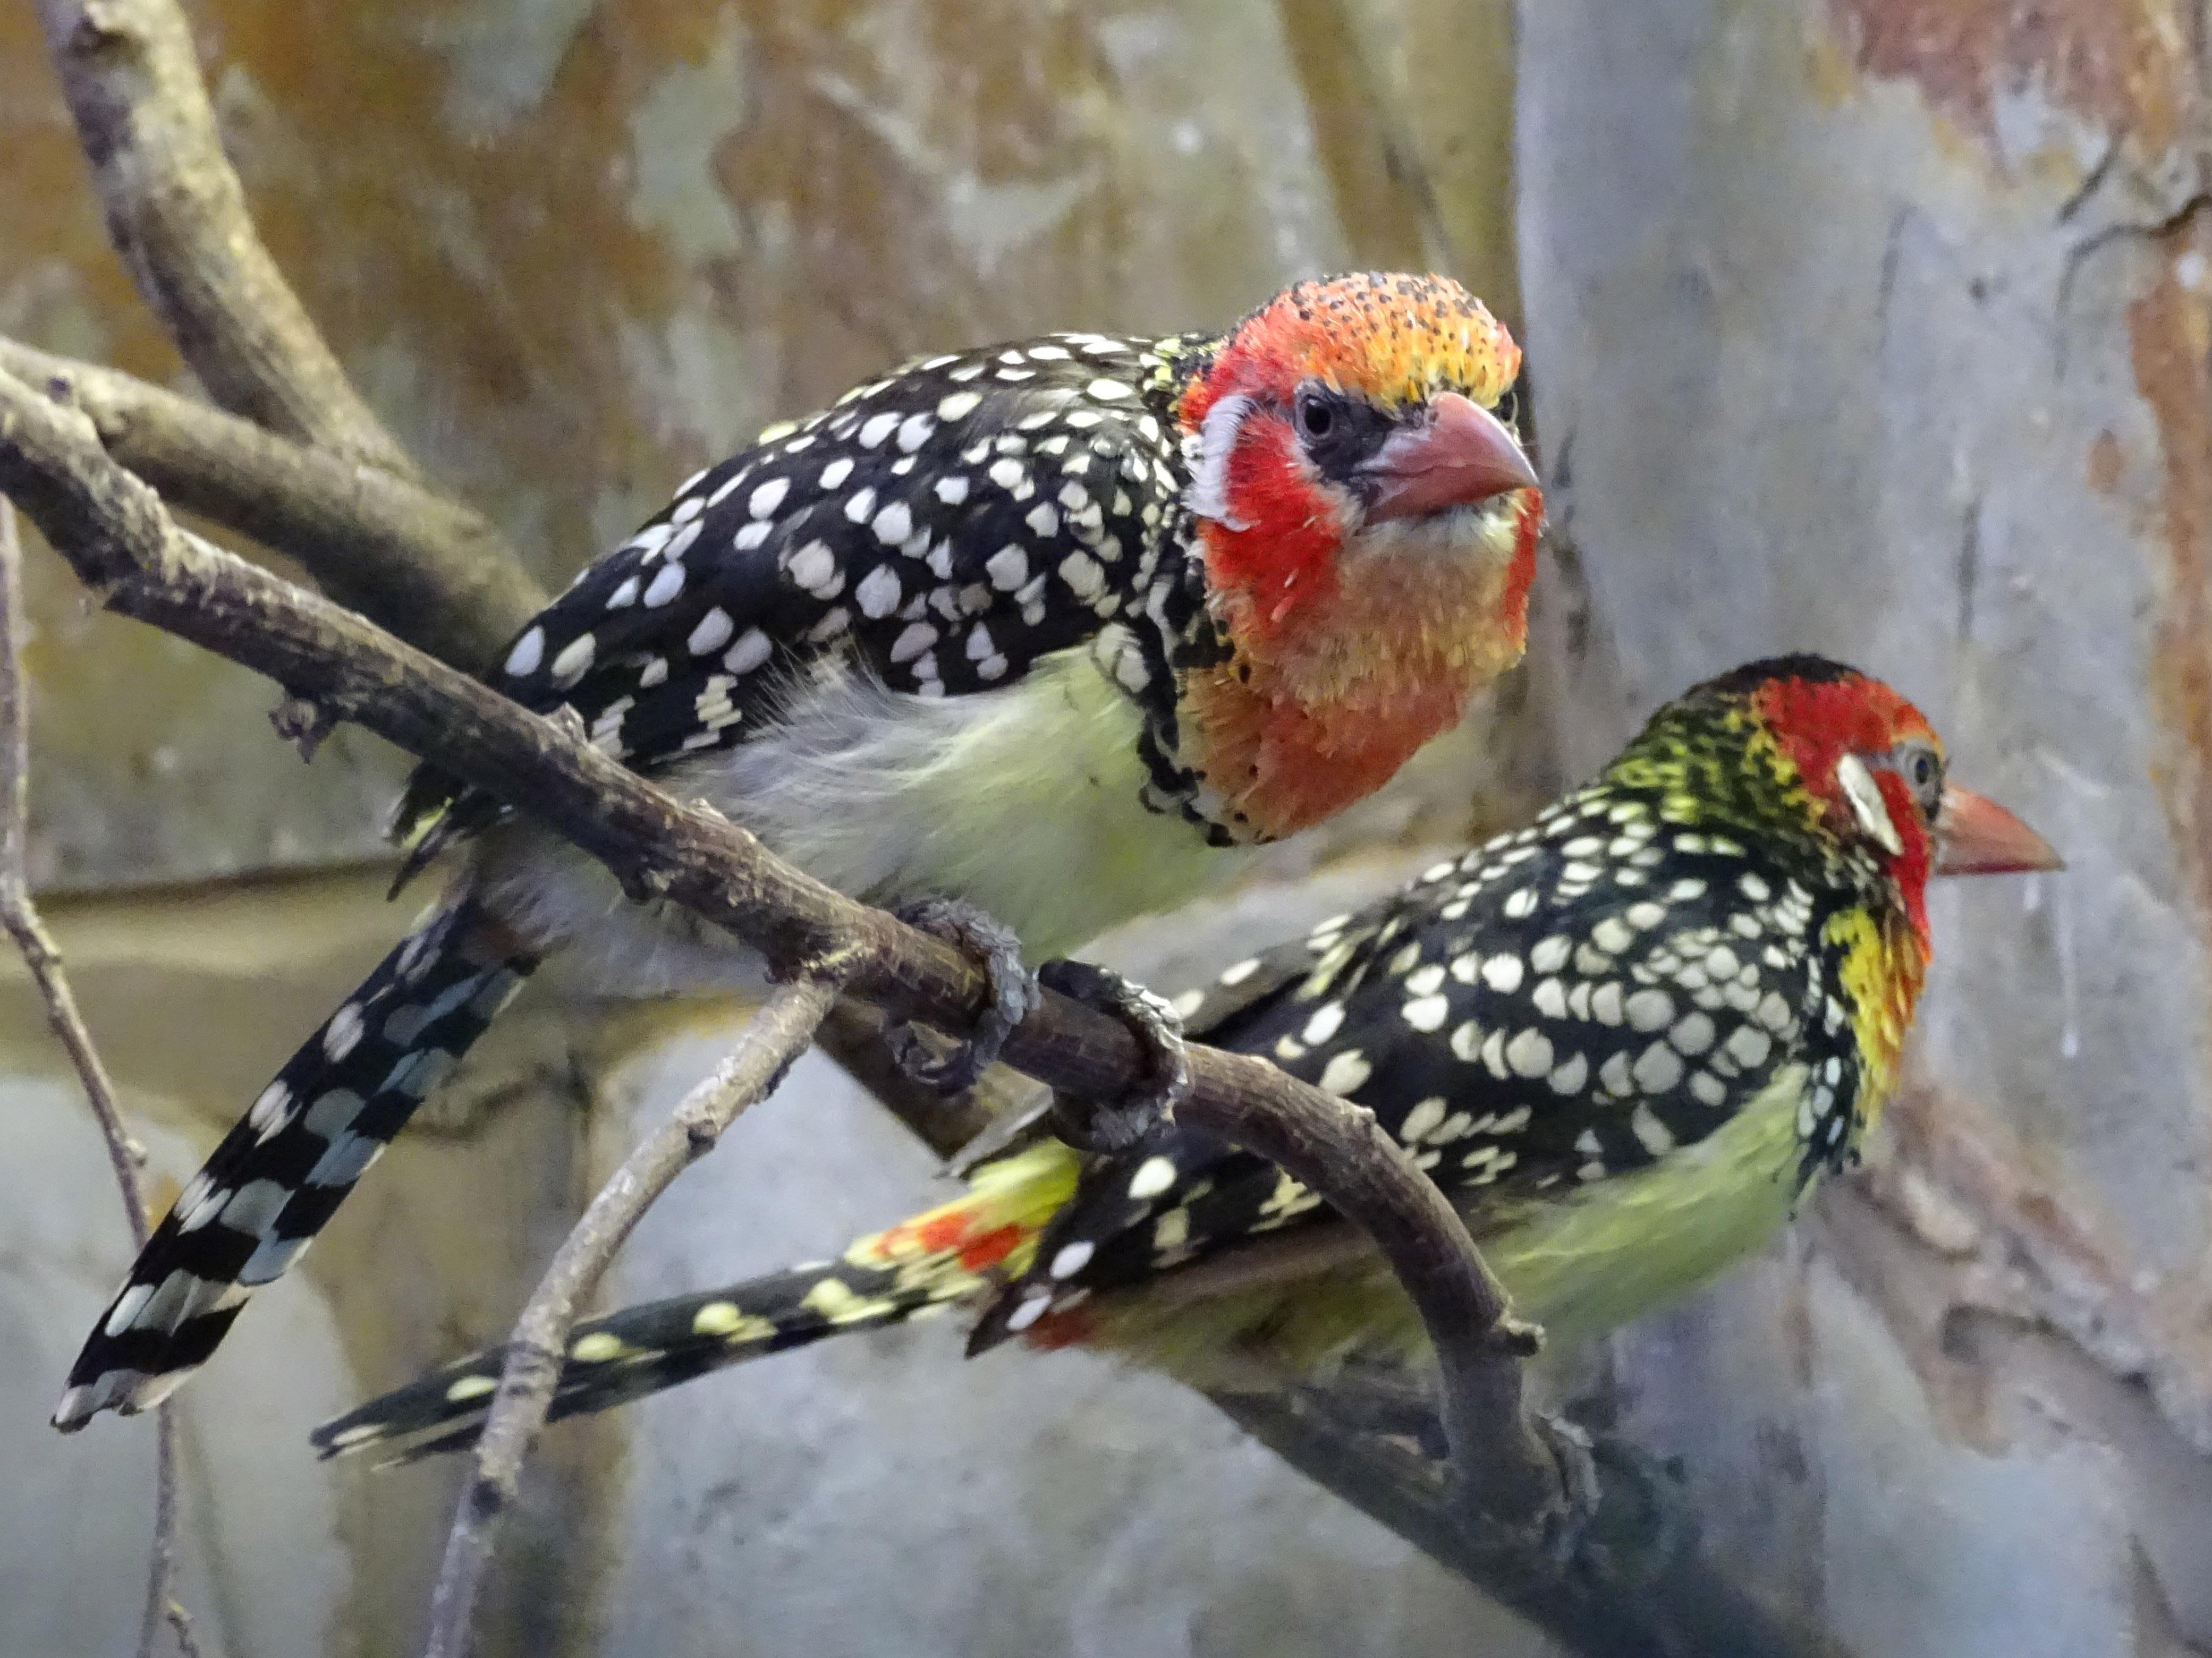 Red-and-yellow barbets at Birdworld in England. (SurreyJohn / Wikimedia Commons)